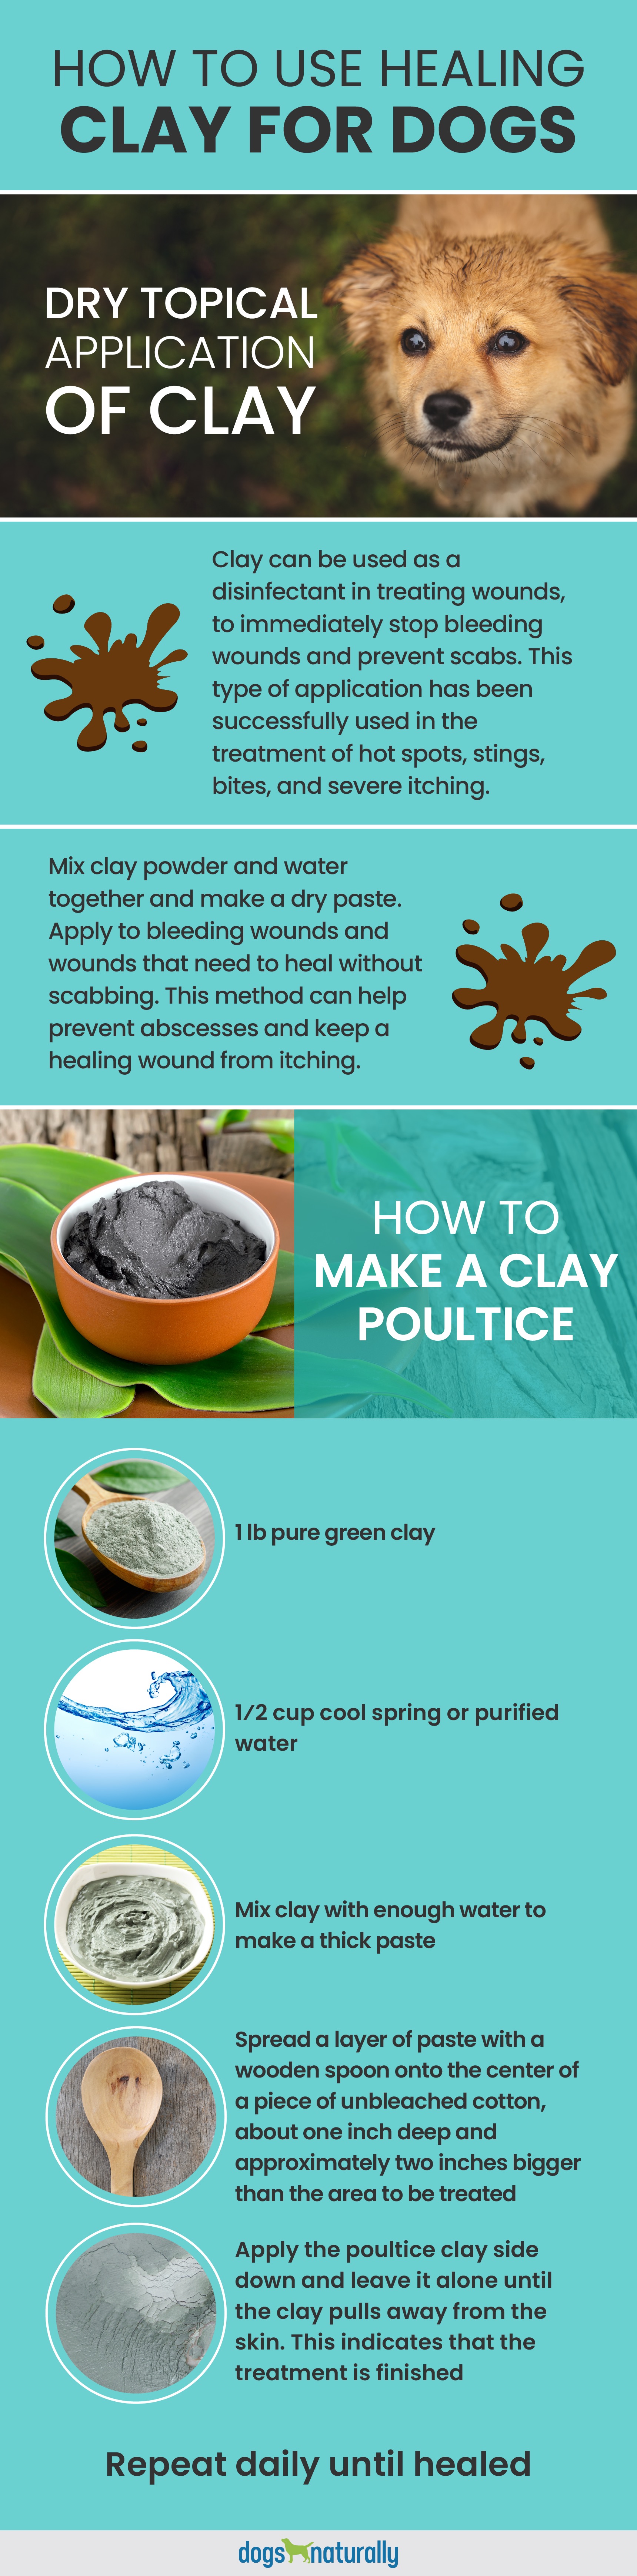 How to use healing clay for dogs